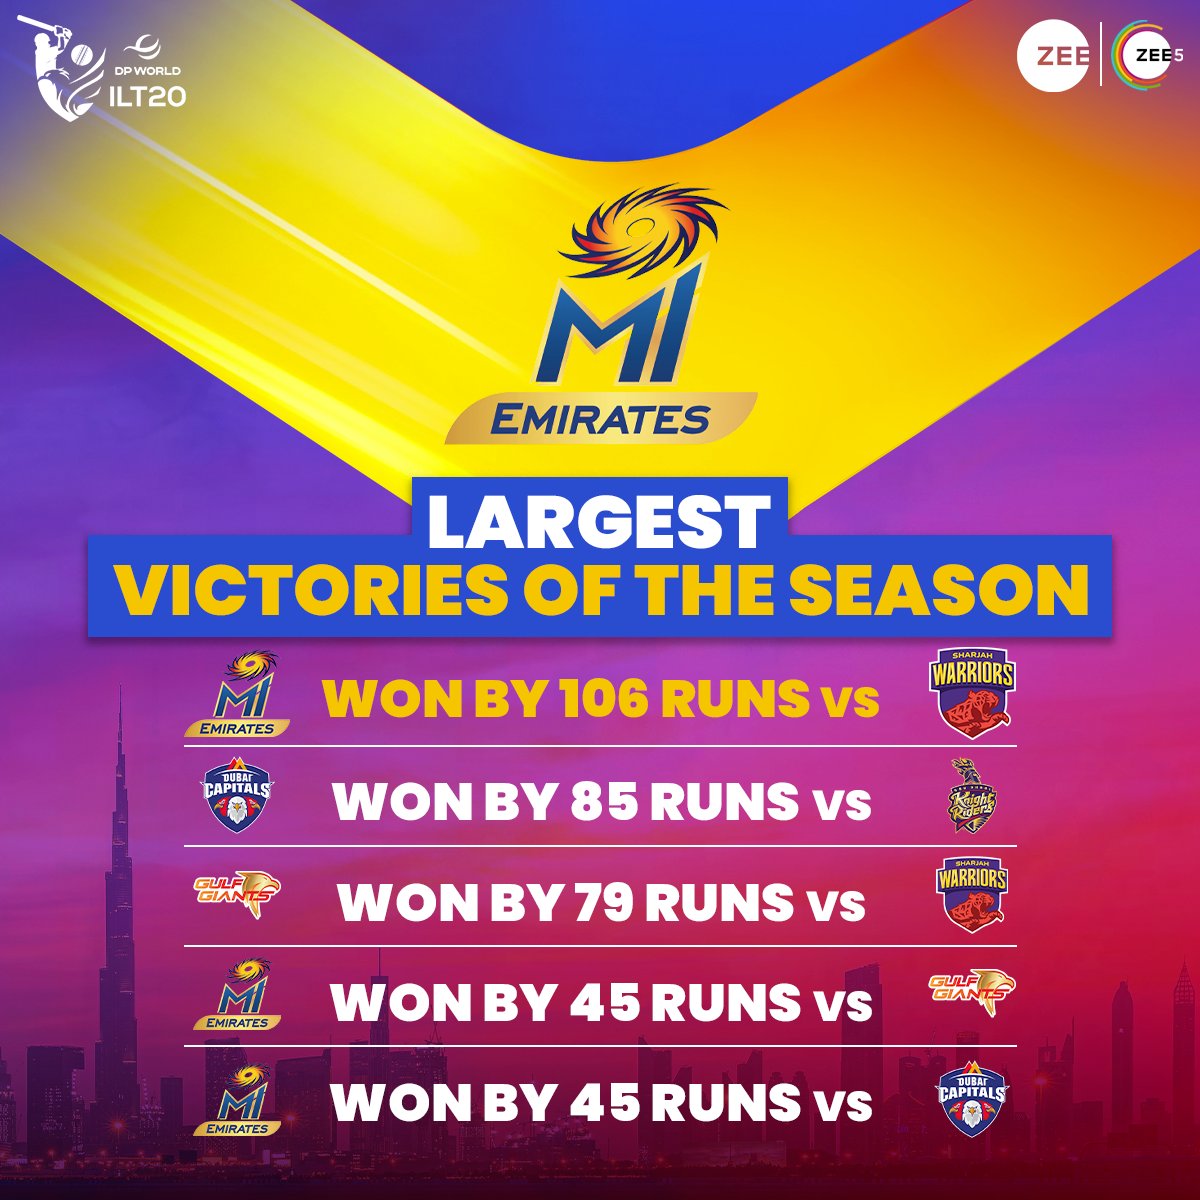 CHAMPIONS on 🔝 A 🔥 performance from MI Emirates was too hot to handle for the Warriors 🥵 #KoiKasarNahiChhodenge | #DPWorldILT20onZee